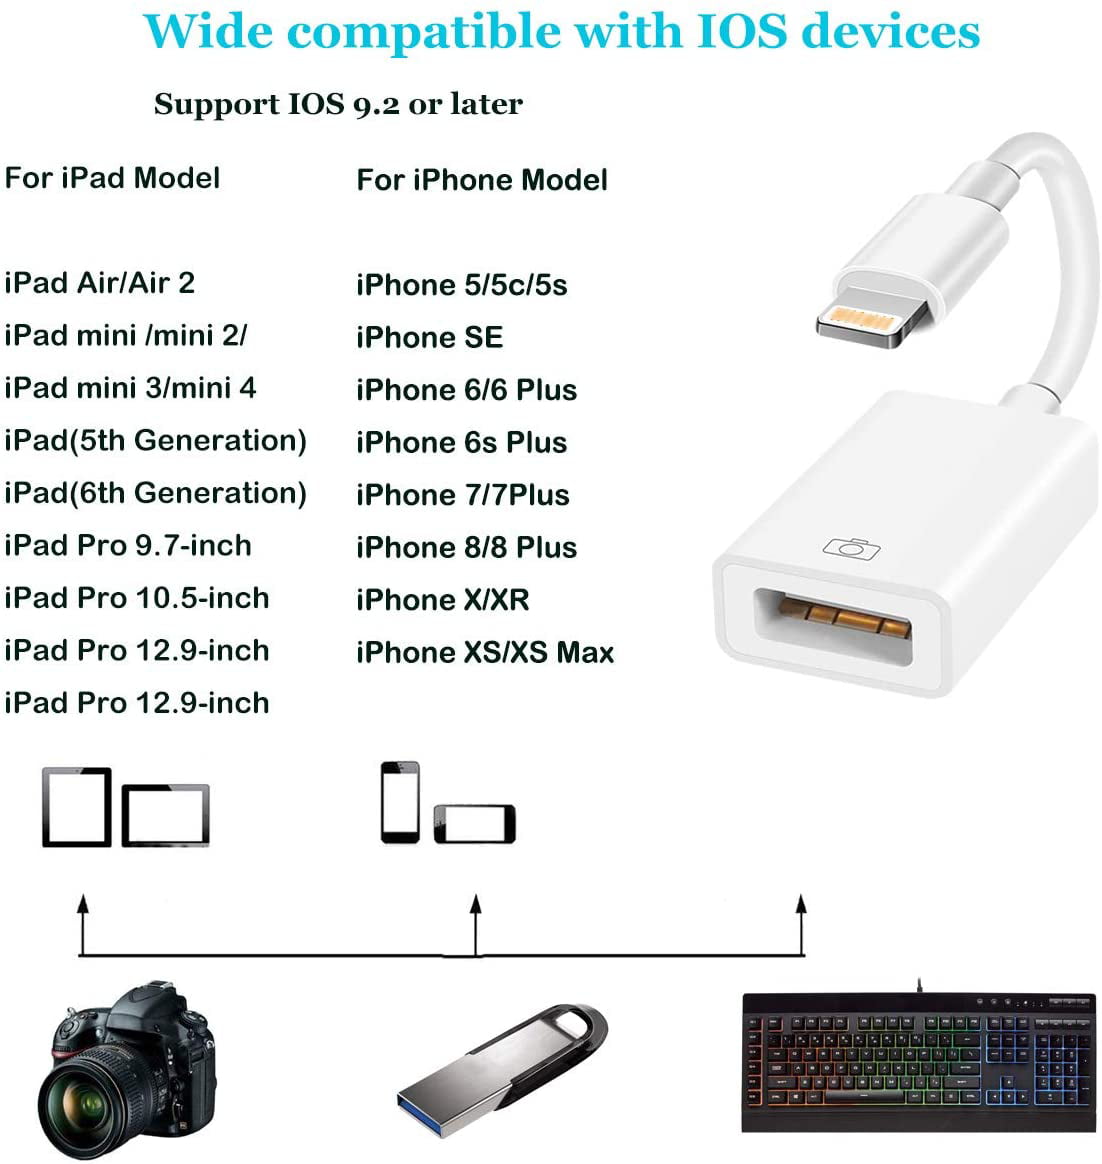  Apple Lightning to USB Camera Adapter, USB 3.0 OTG Cable for  iPhone/iPad to Connect Card Reader, USB Flash Drive, U Disk, Keyboard,  Mouse, Hubs, MIDI, Plug & Play (White) : Electronics